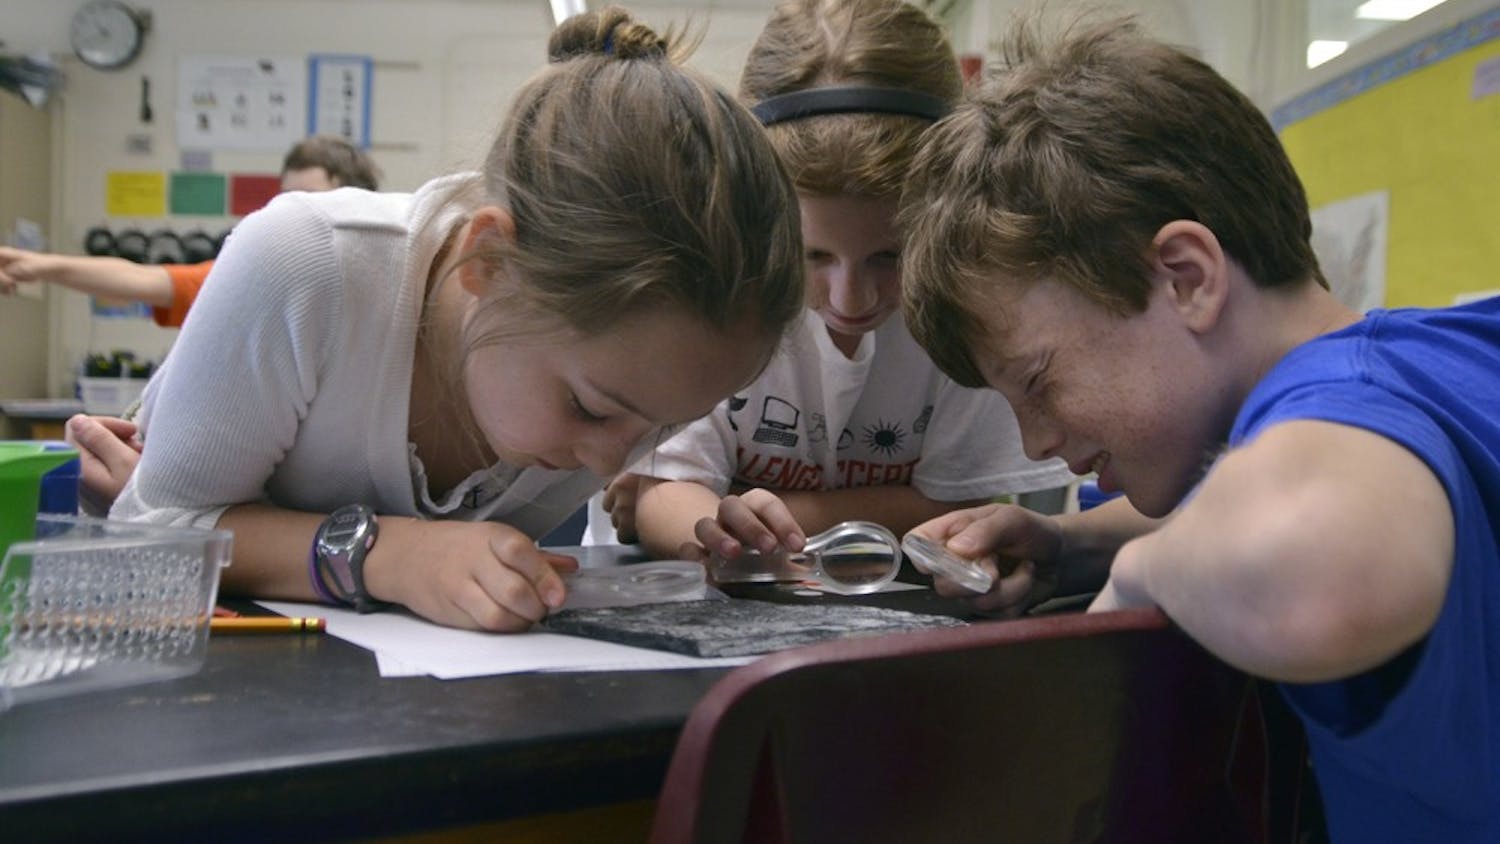 Students at Carrboro Elementary School attend classes in English for half of the day and a foreign language for the second half of the day as part of a dual language immersion program. These programs result in higher EOG test scores. Nathan Ludington (10), Lucy Mills (9), and Maddie Hamilton (10) study fossils during the English portion of their day.